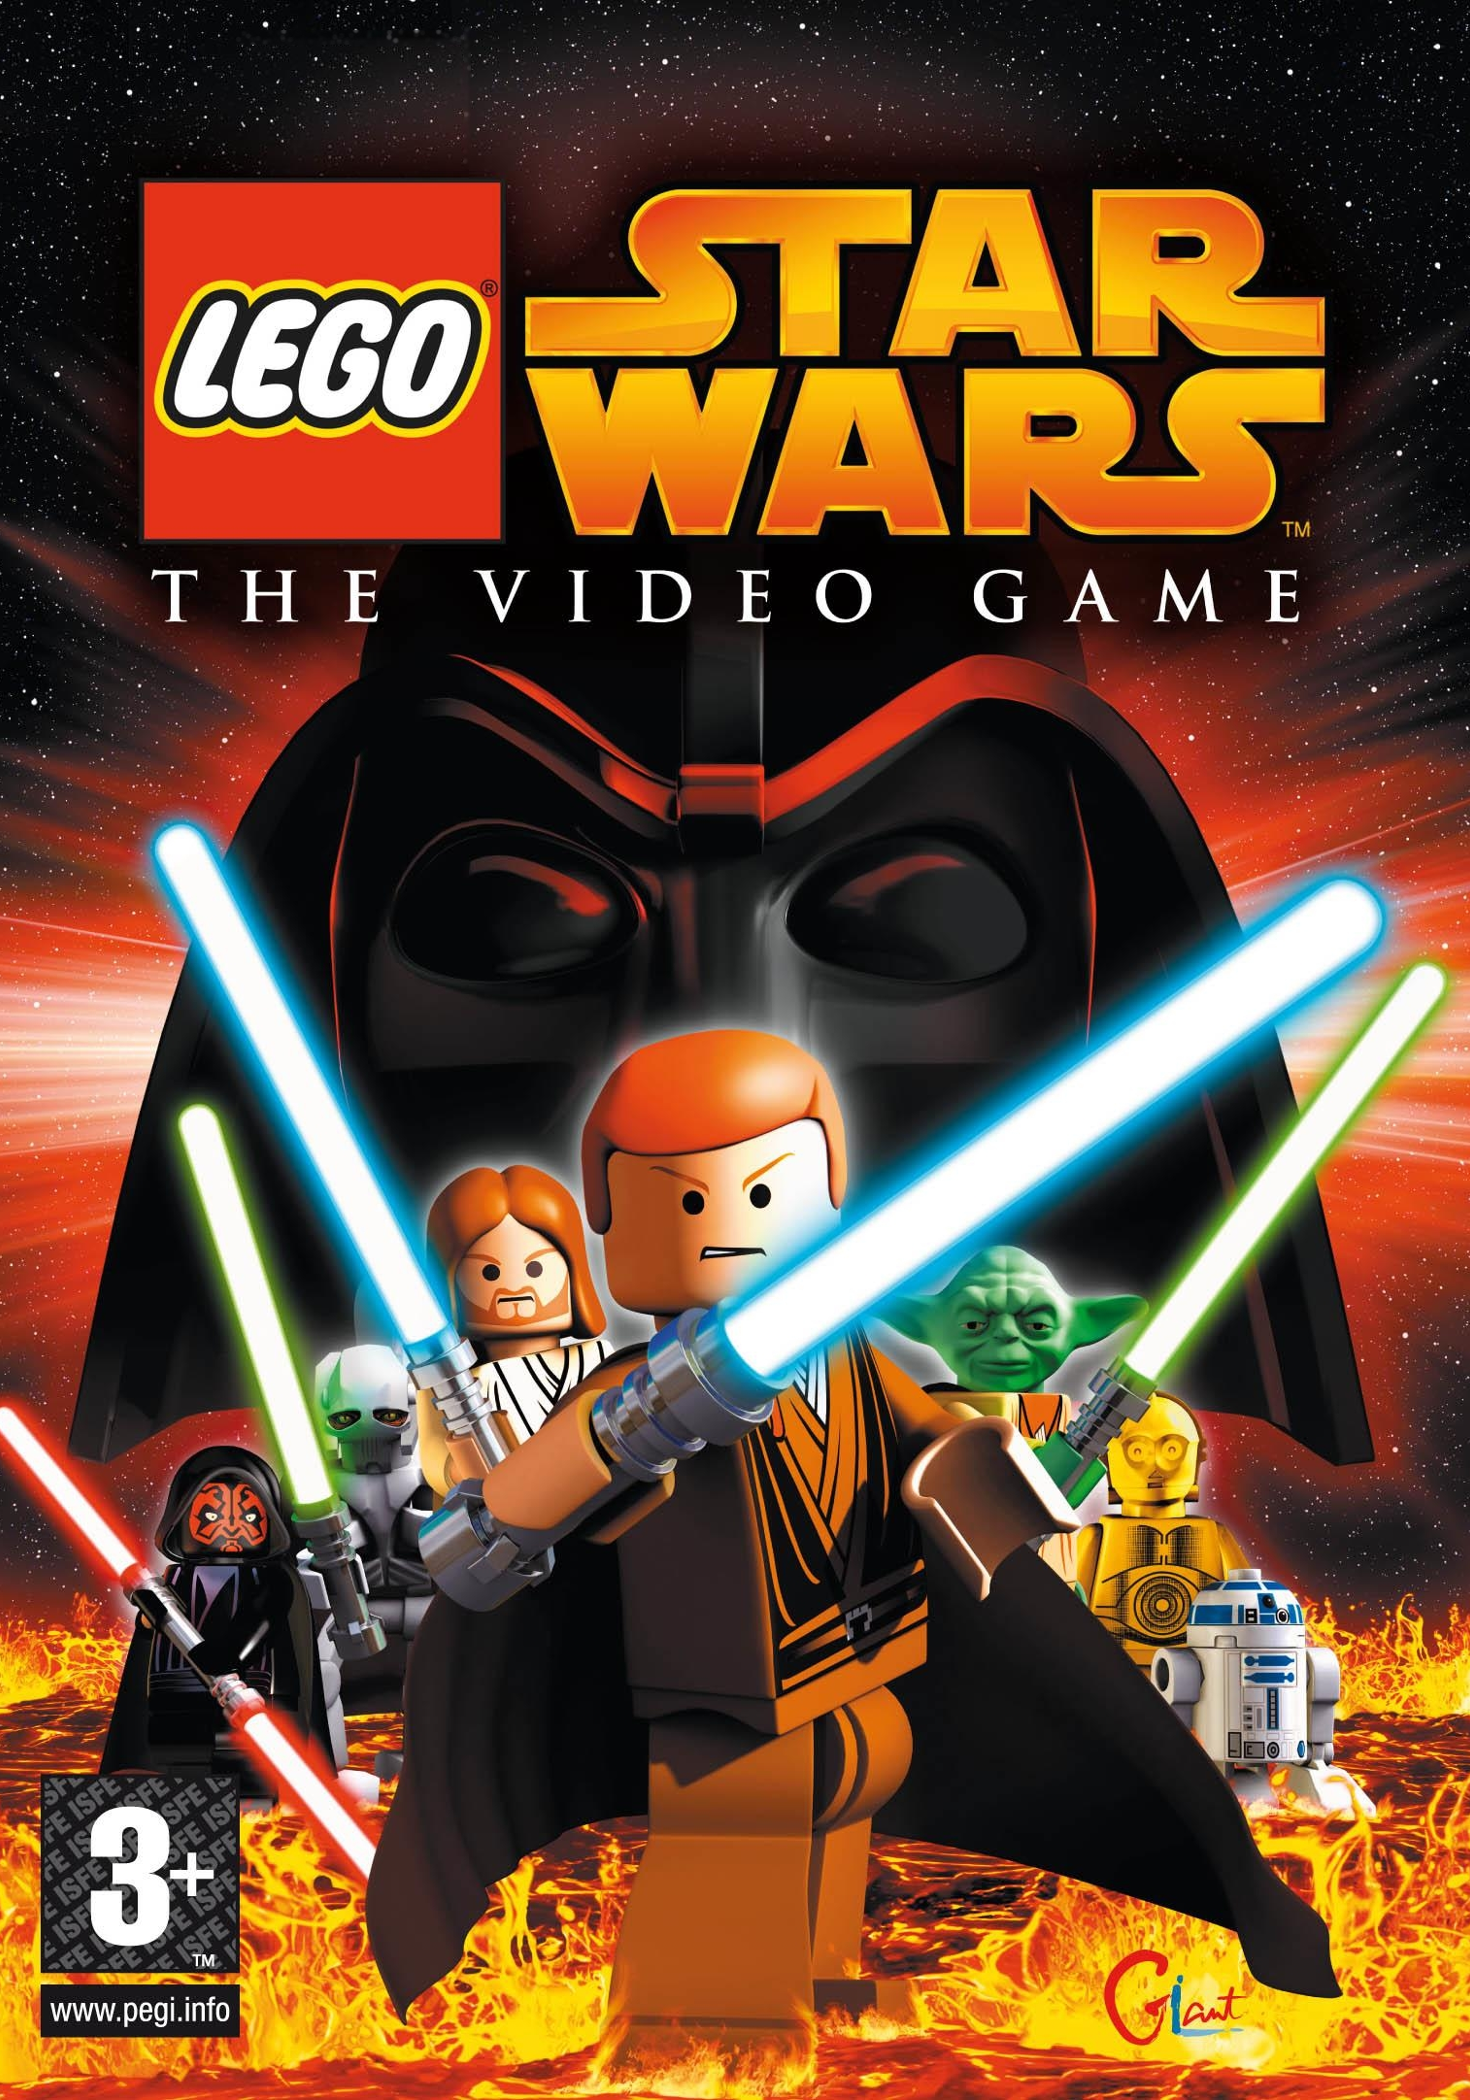 Image of LEGO Star Wars: The Video Game